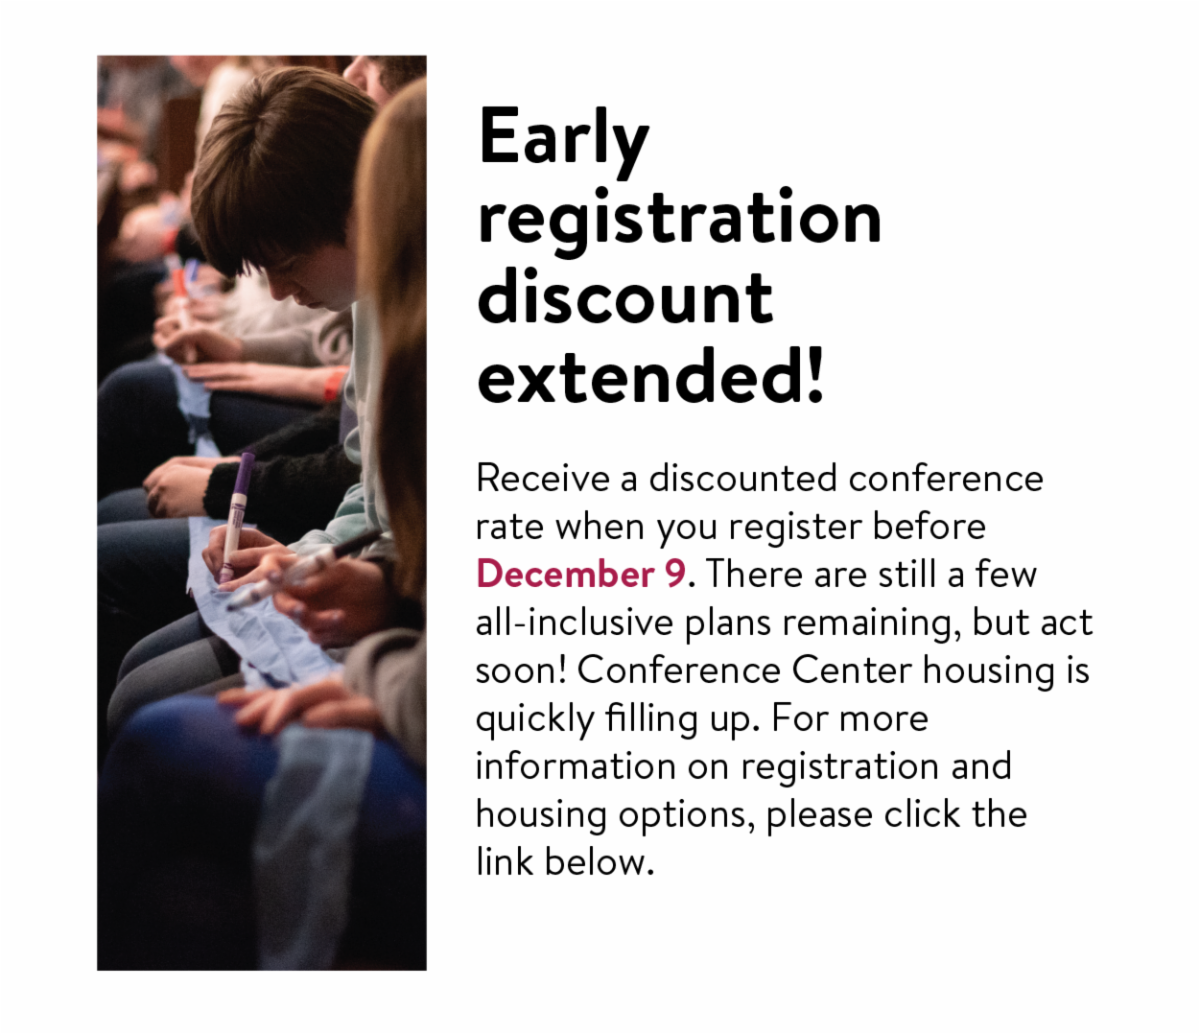 Early registration discount extended! - Receive a discounted conference rate when you register before December 9. There are still a few all-inclusive plans remaining, but act soon! Conference Center housing is quickly filling up. For more information on registration and housing options, please click the link below.